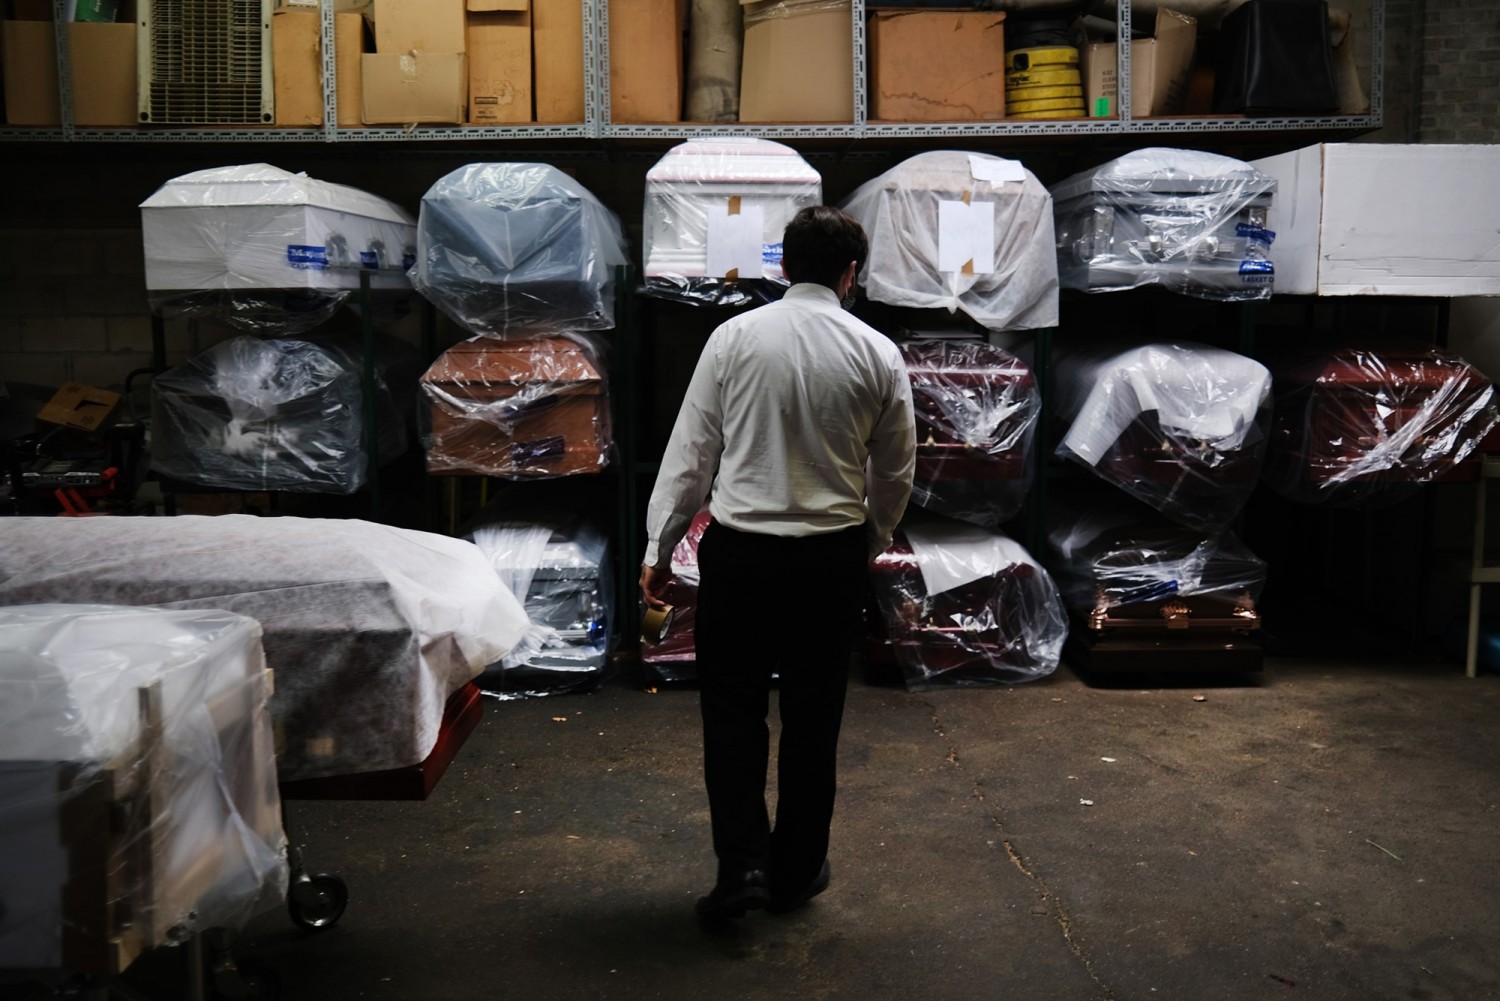 James Harvey tends to the inventory of pre-sold caskets at a funeral home in New York City in April.Spencer Platt / Getty Images file